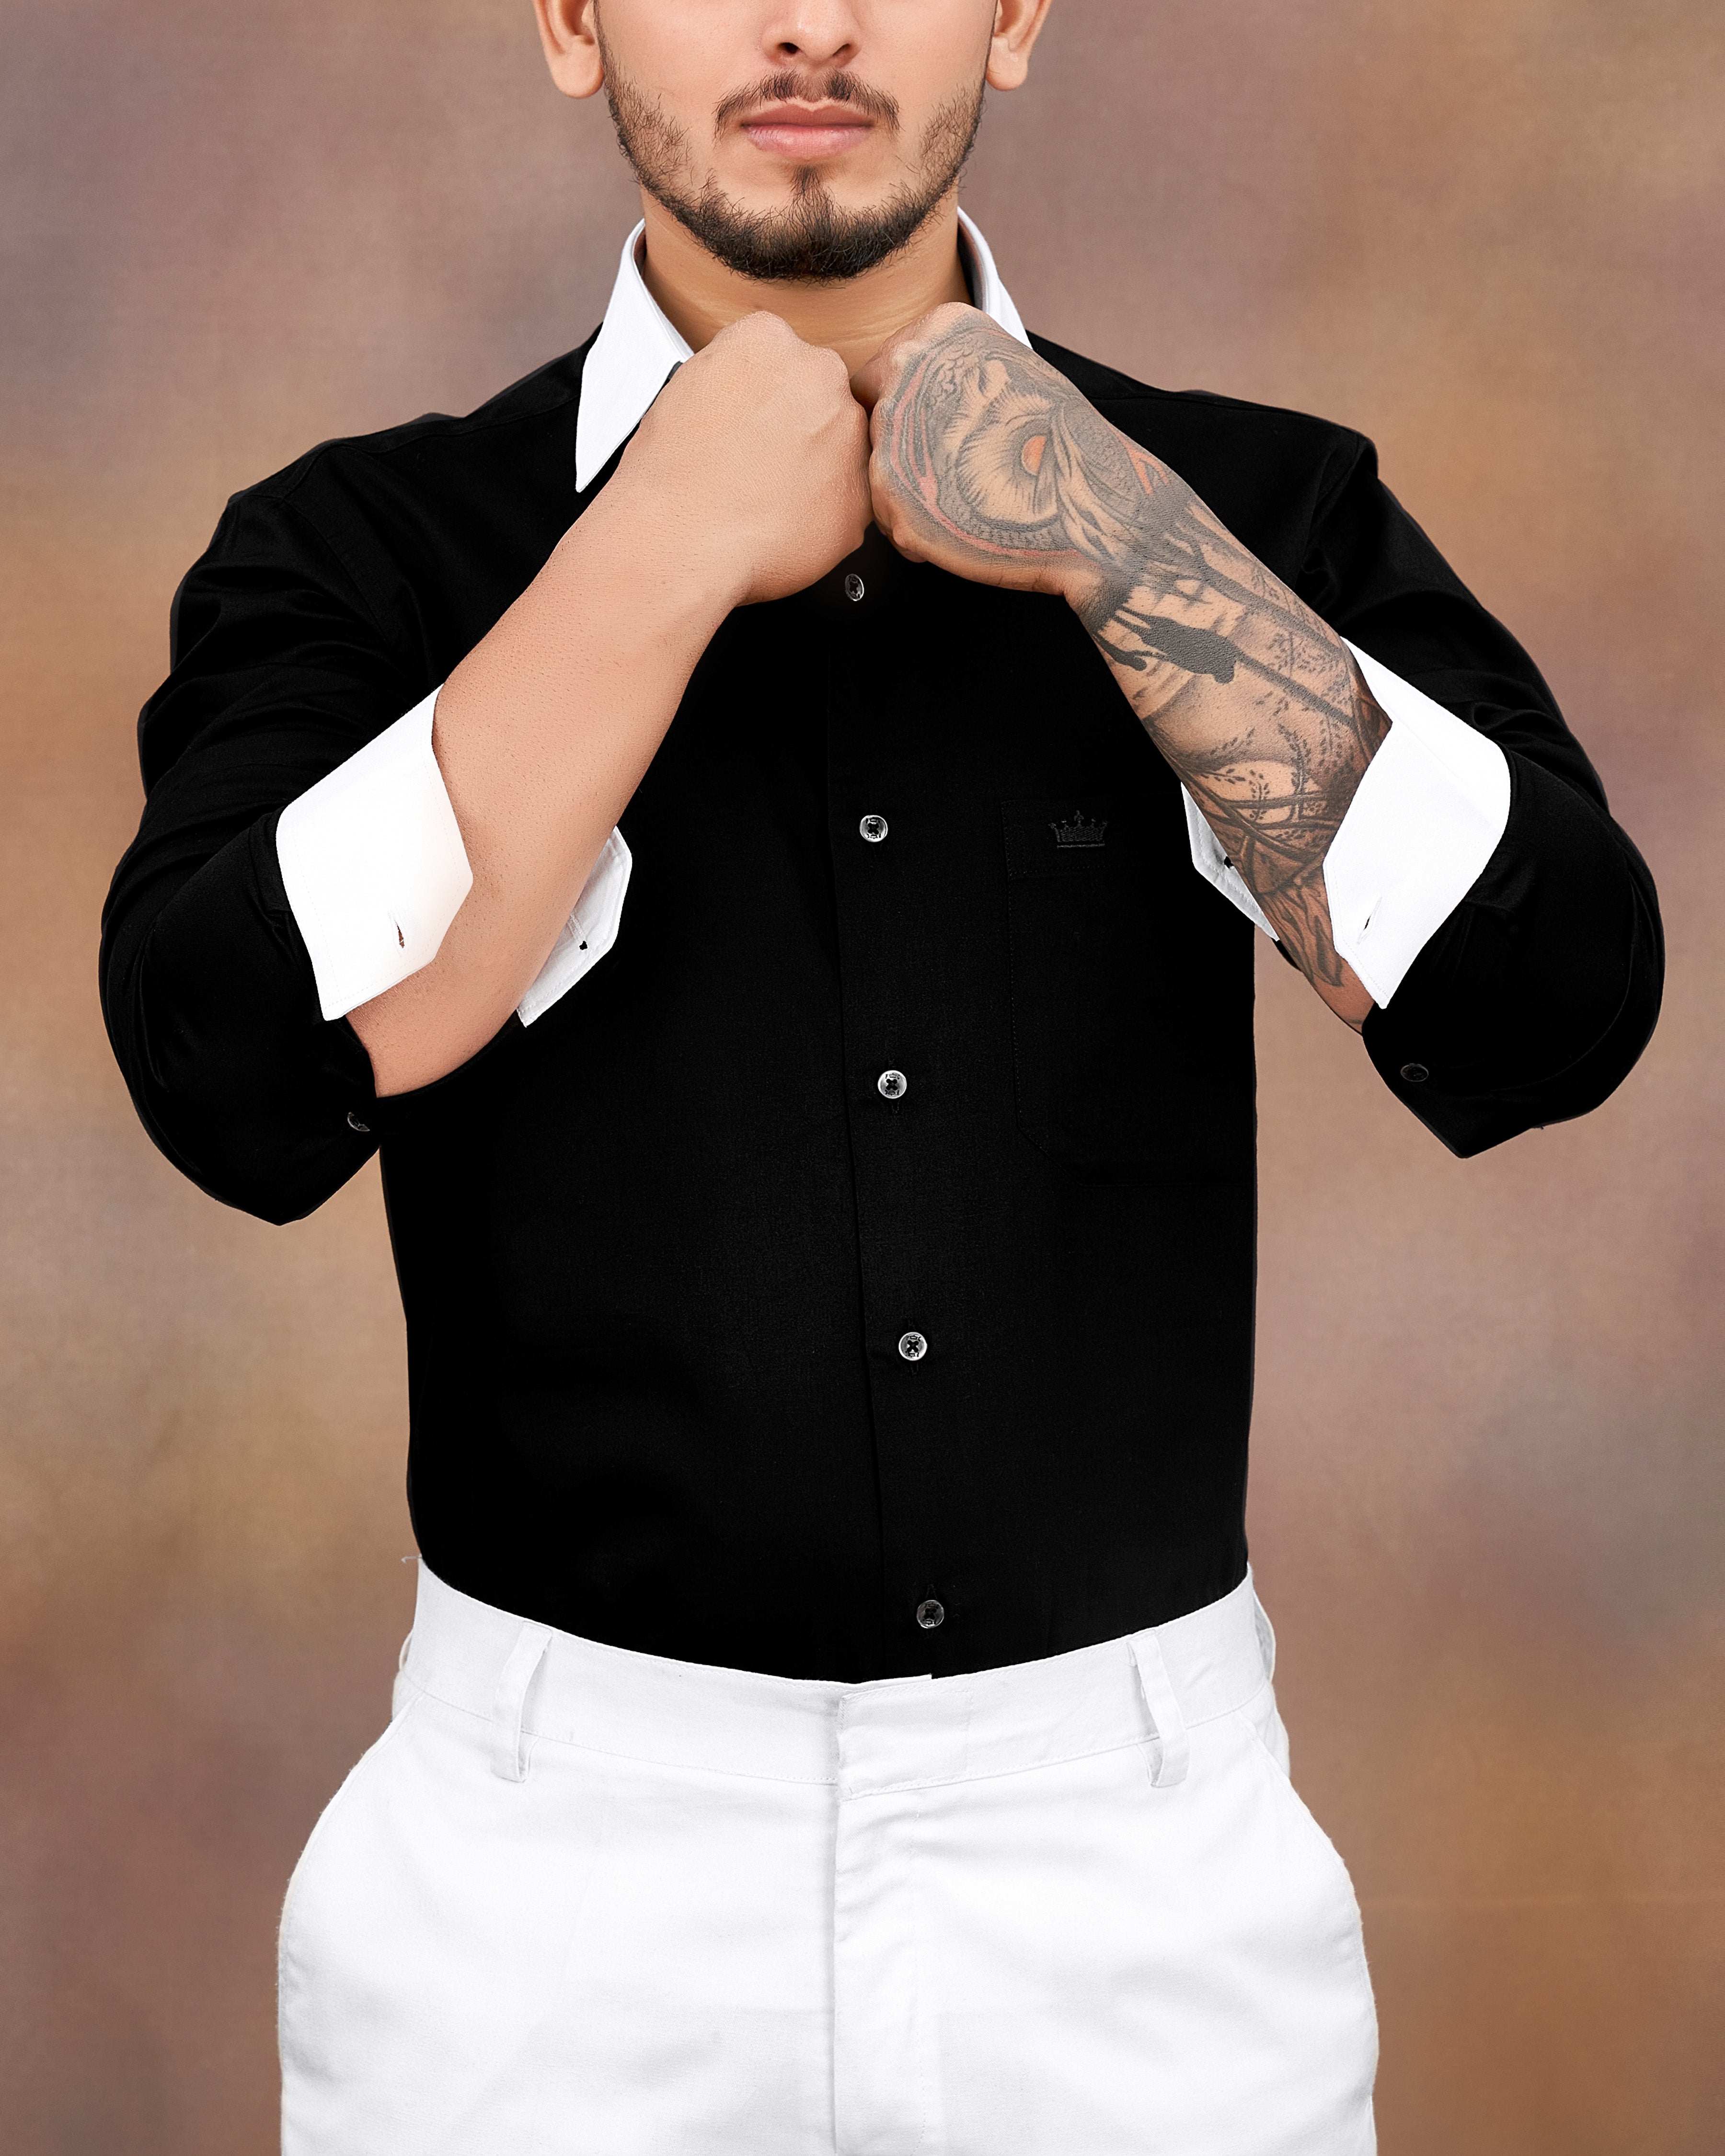 Jade Black with White Collar and Cuffs Premium Cotton Shirt 8524-WCC-38, 8524-WCC-H-38, 8524-WCC-39, 8524-WCC-H-39, 8524-WCC-40, 8524-WCC-H-40, 8524-WCC-42, 8524-WCC-H-42, 8524-WCC-44, 8524-WCC-H-44, 8524-WCC-46, 8524-WCC-H-46, 8524-WCC-48, 8524-WCC-H-48, 8524-WCC-50, 8524-WCC-H-50, 8524-WCC-52, 8524-WCC-H-52